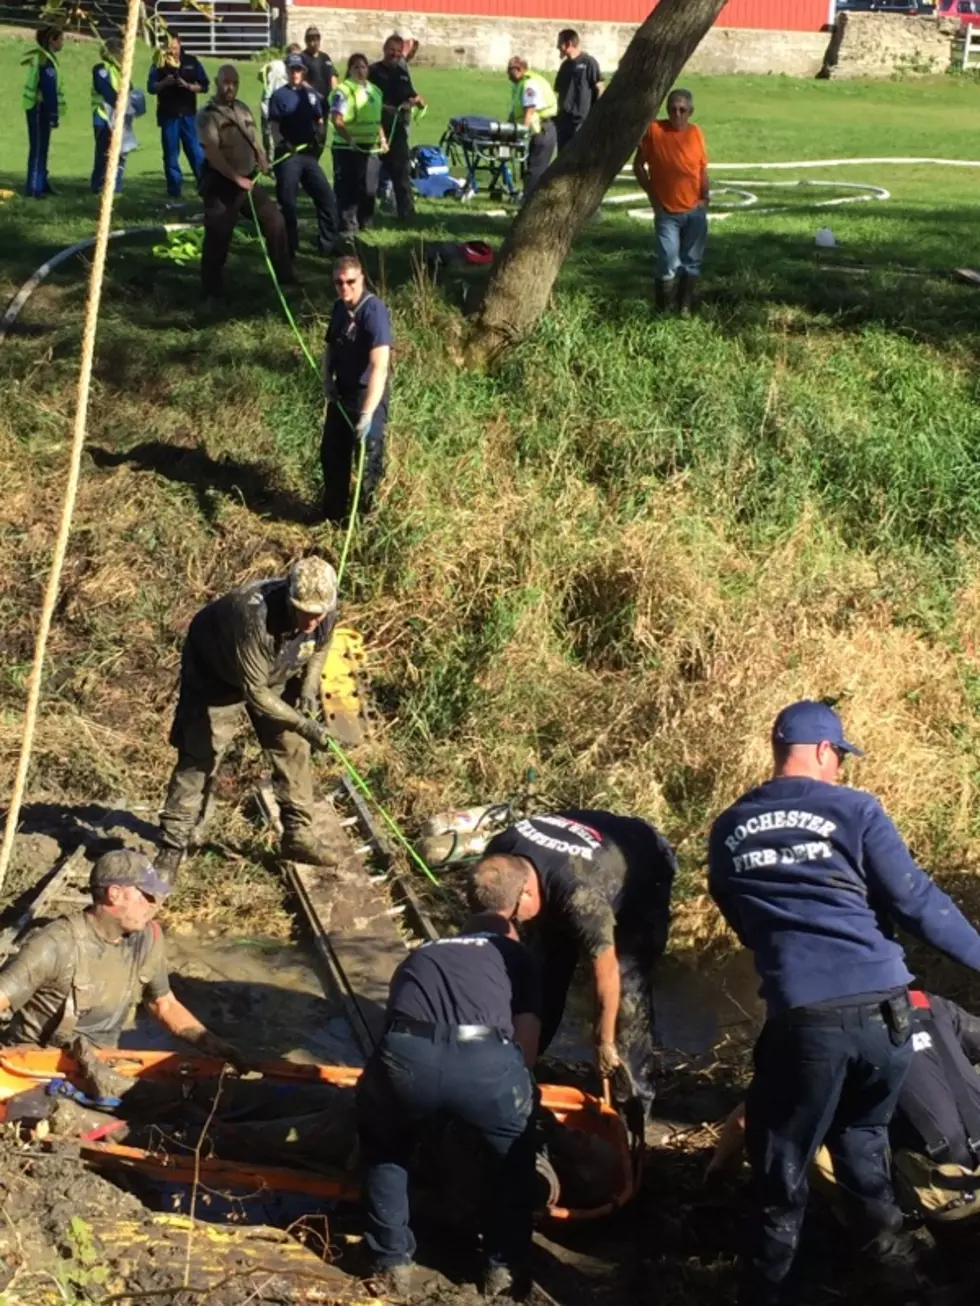 Man Rescued After Hours Trapped in Creek Bed